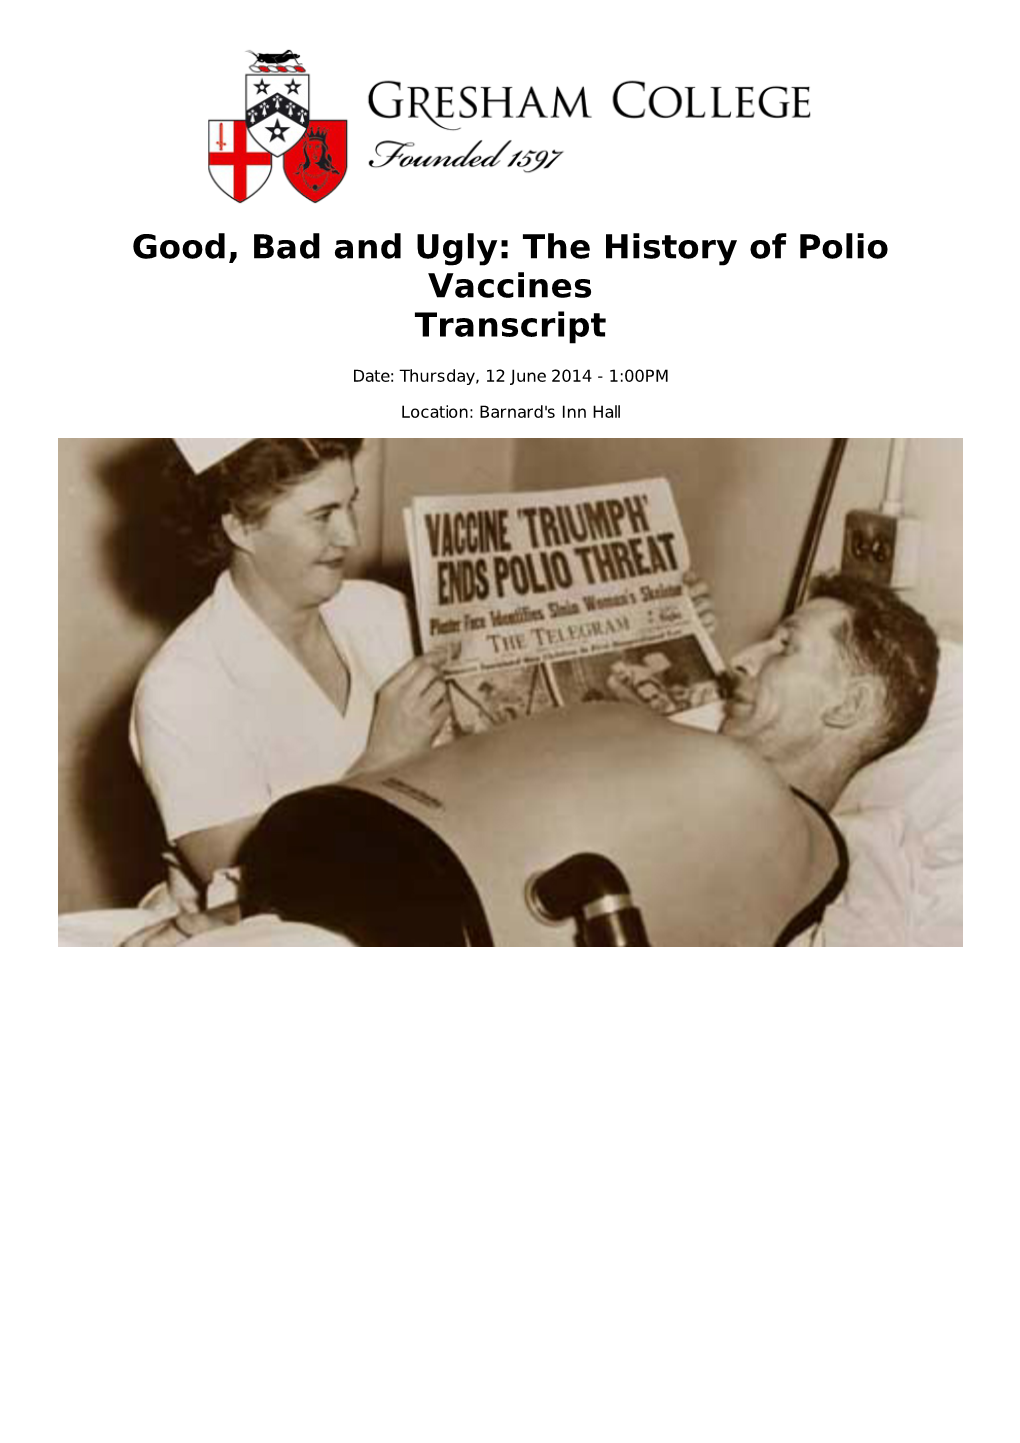 Good, Bad and Ugly: the History of Polio Vaccines Transcript